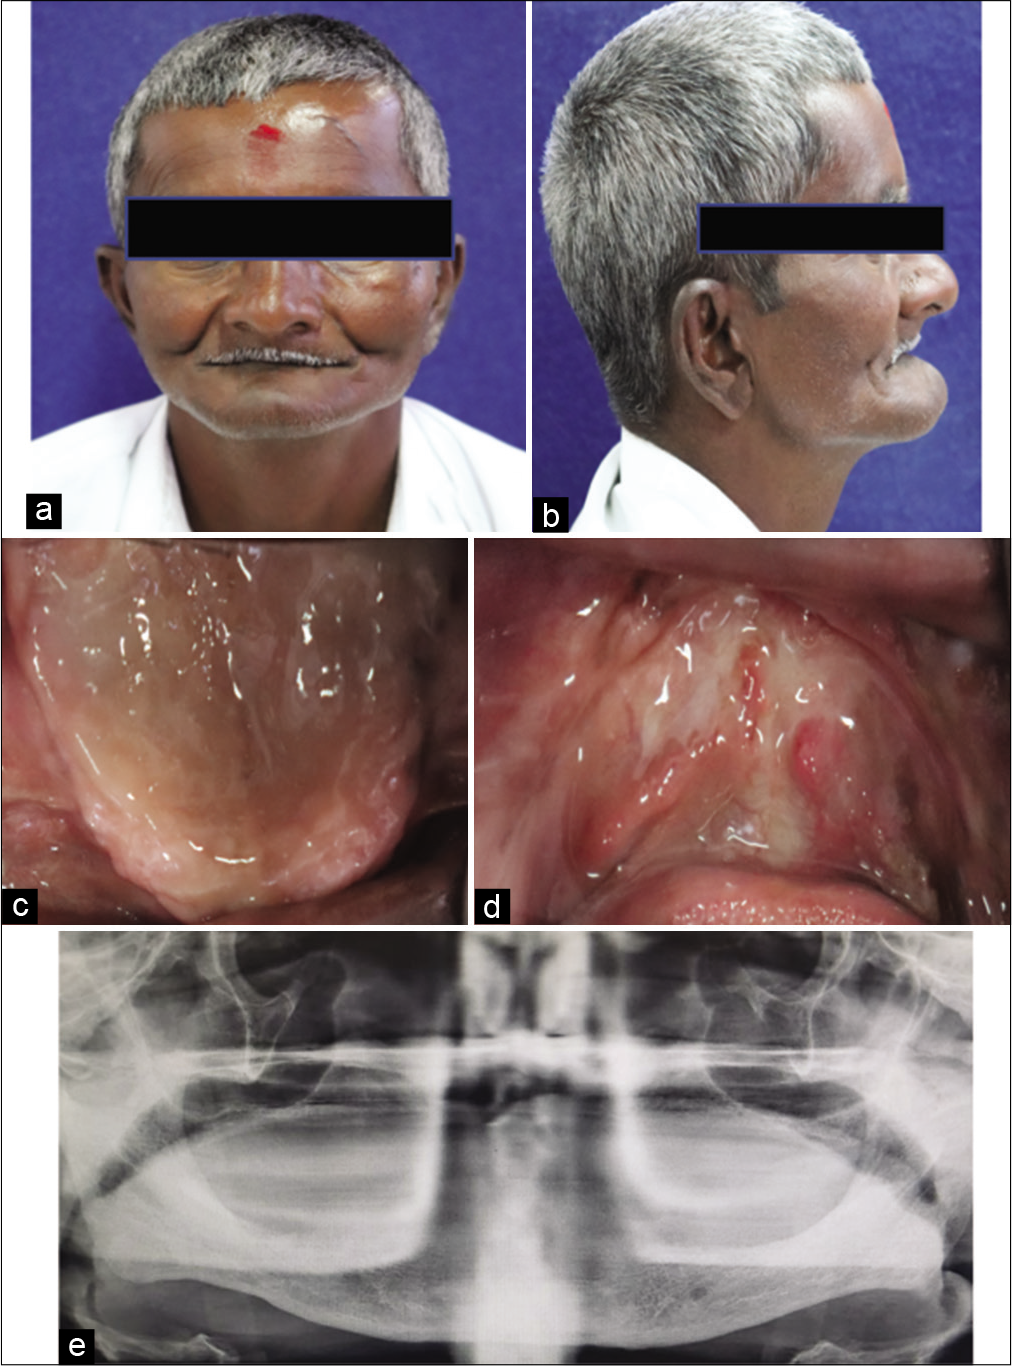 (a) Pre-operative frontal view, (b) Pre-operative lateral view, (c) Intraoral view (Maxilla), (d) Intraoral view (Mandible), (e) OPG of the patient.